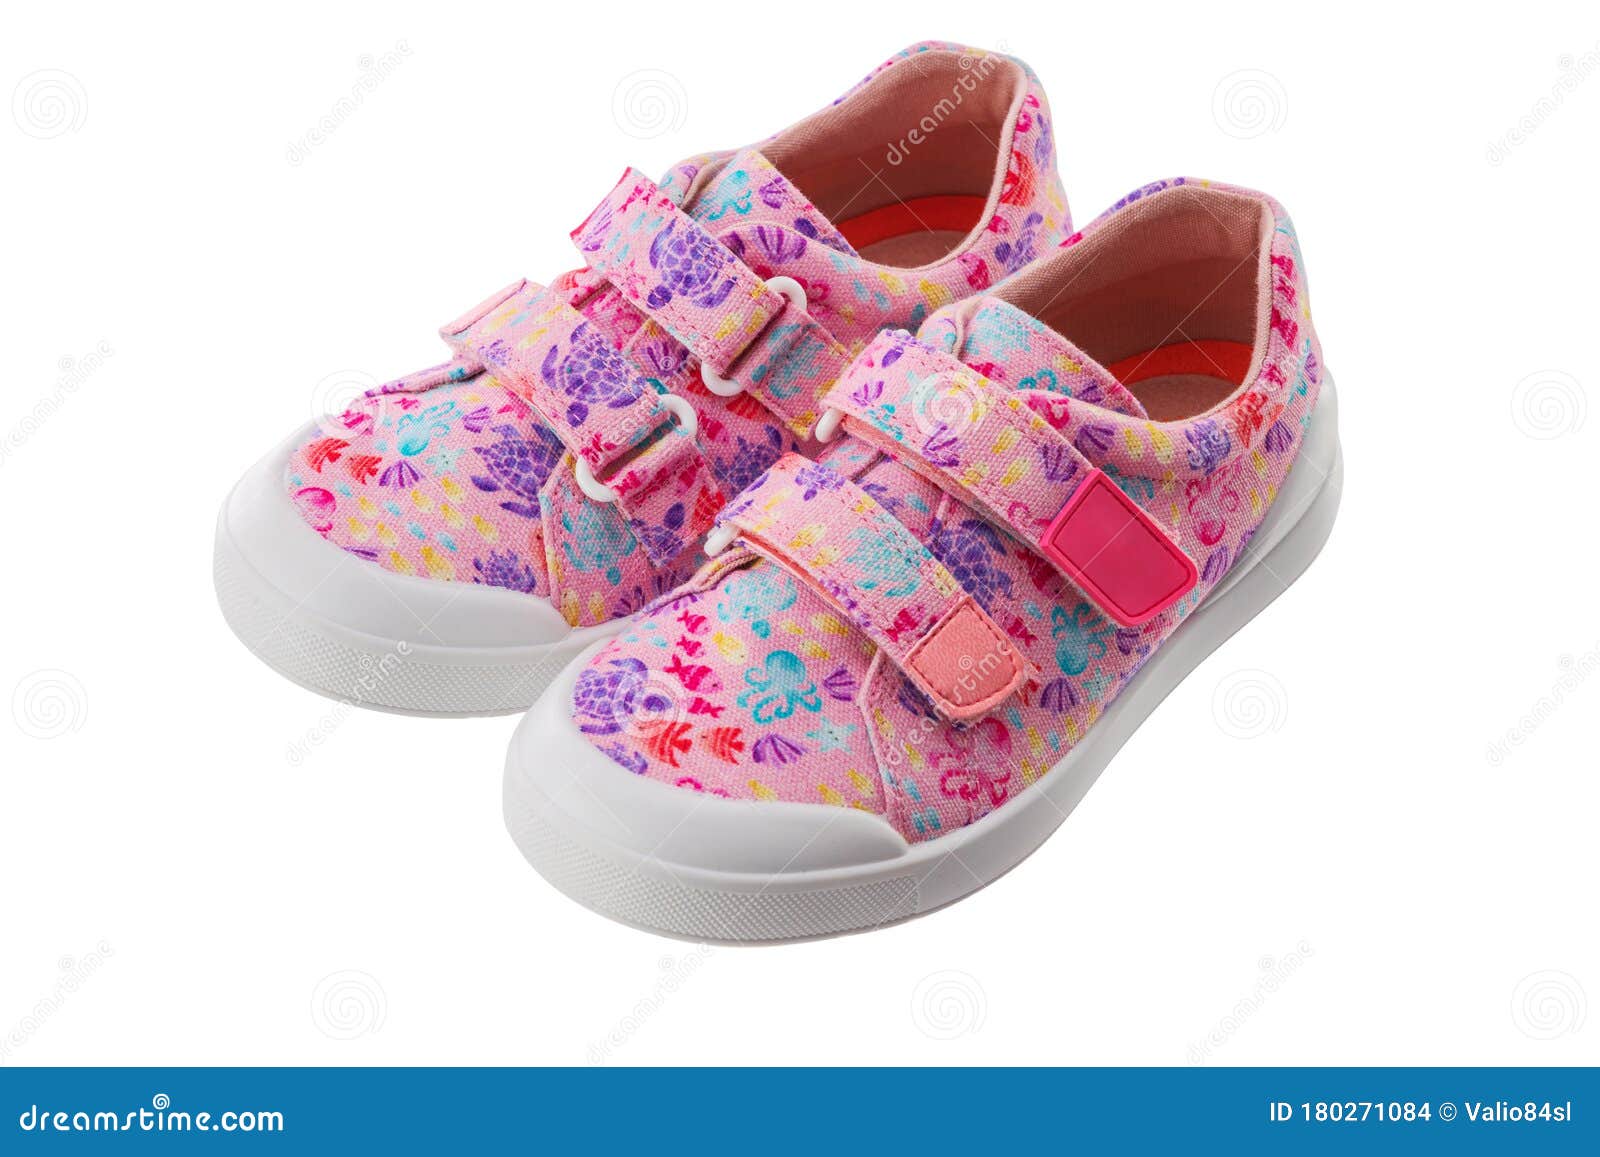 Kids Colorful Casual Shoes Isolated on White Stock Photo - Image of ...